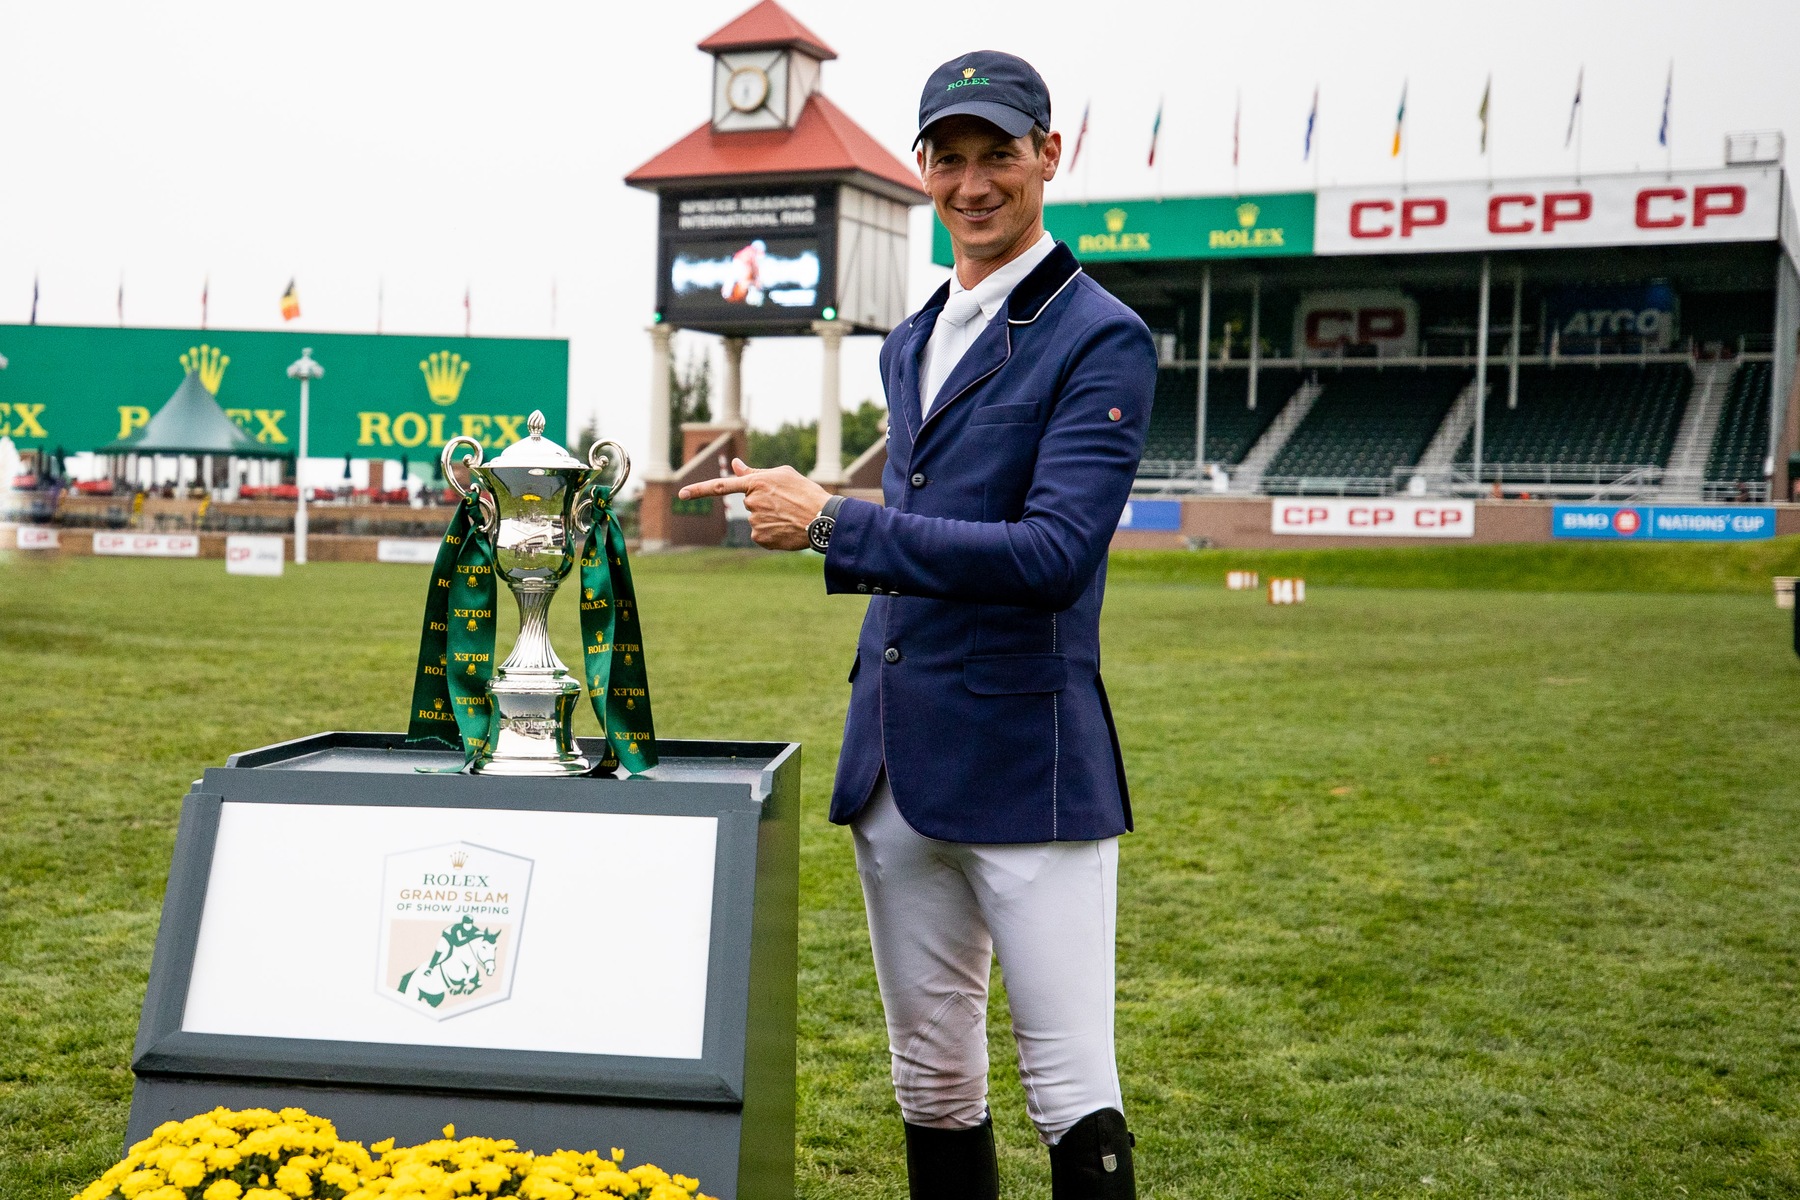 Highlights news film from the CP 'International', Presented by Rolex, at the CSIO Spruce Meadows 'Masters' Tournament 2022